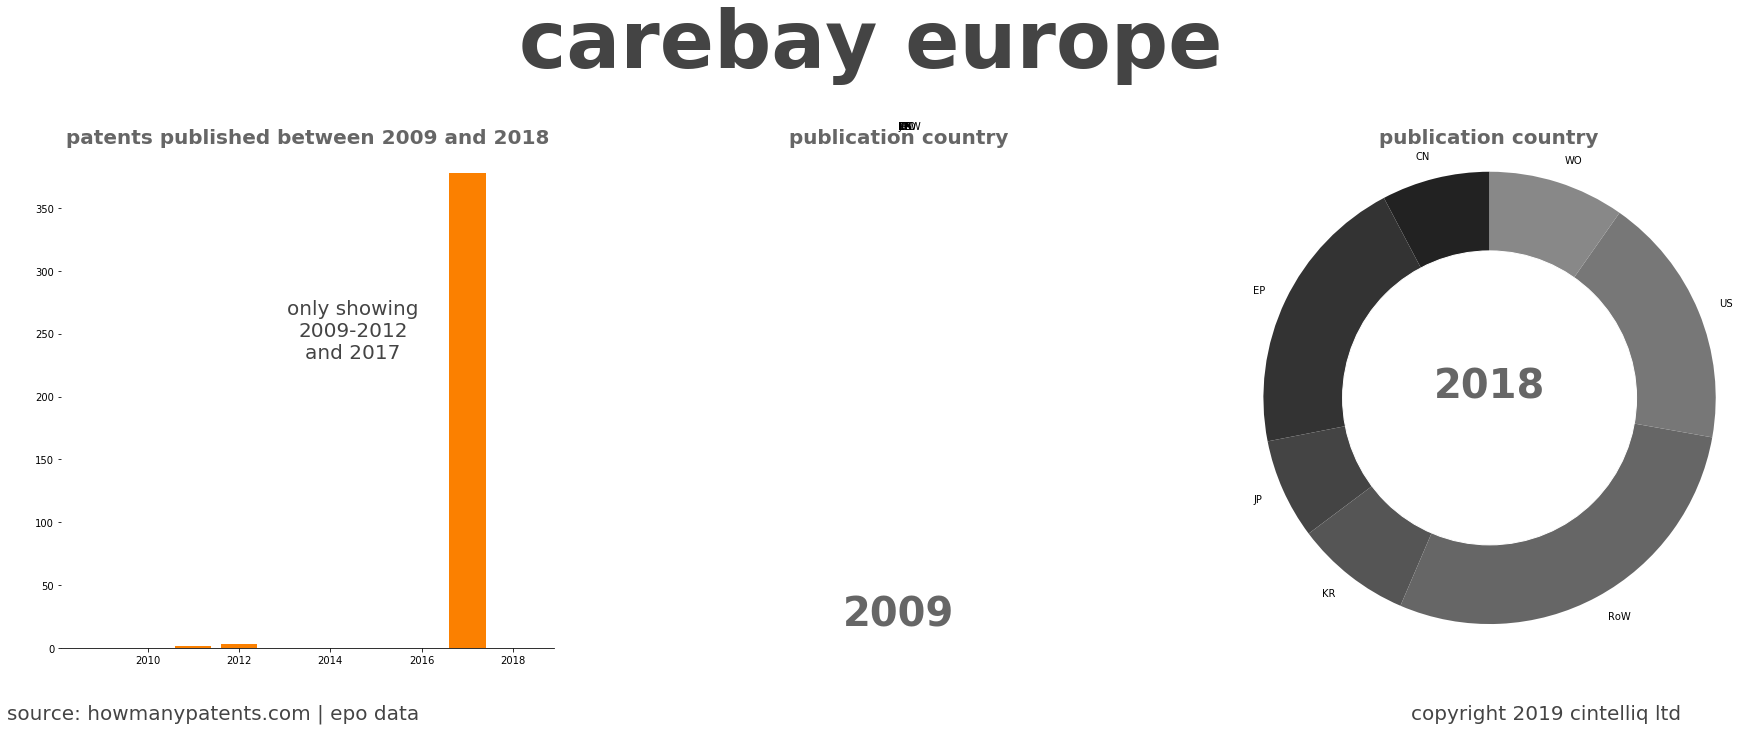 summary of patents for Carebay Europe